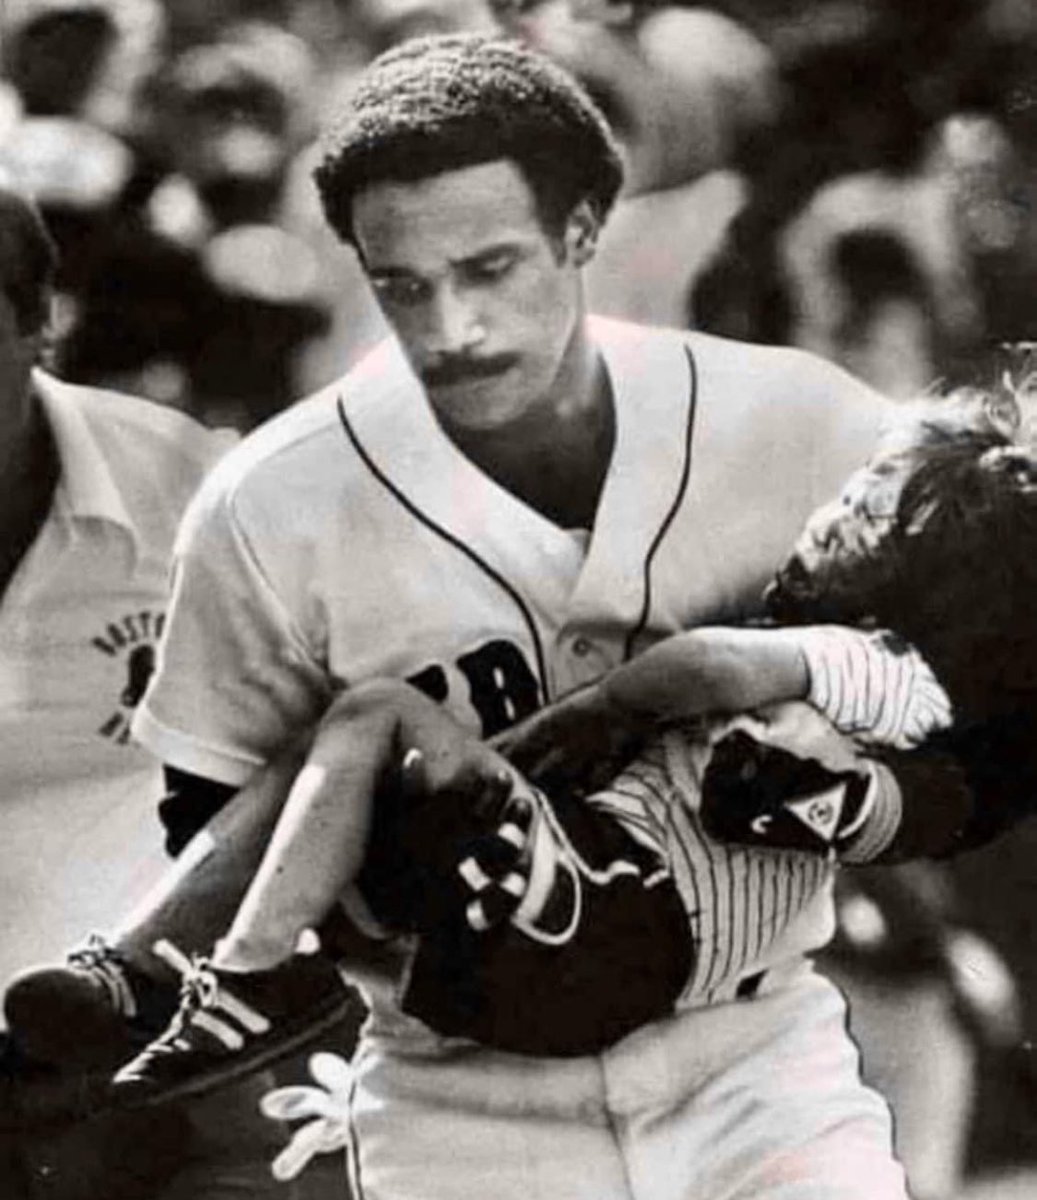 Want to know what a sports hero looks like? Well, on August 8, 1982, a line-drive foul ball hit a four-year-old boy in the head at Fenway leaving him in critical condition. Jim Rice realized that it would take EMTs too long to arrive, so he sprang into action. He jumped up…